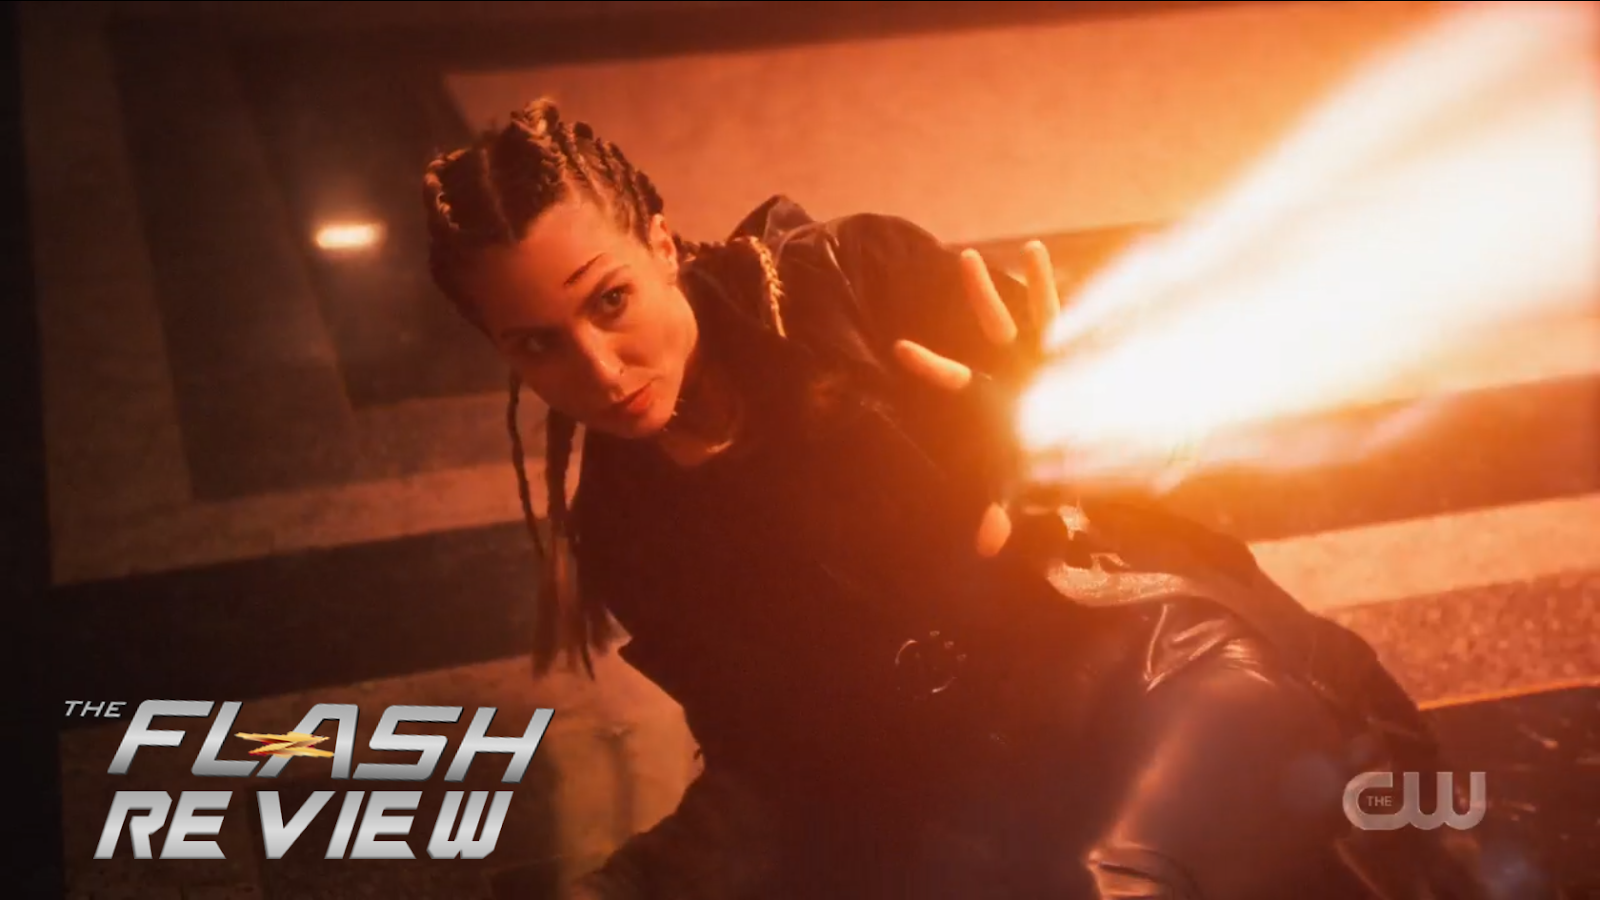 THE FLASH THE GIRL WITH THE RED LIGHTNING REVIEW